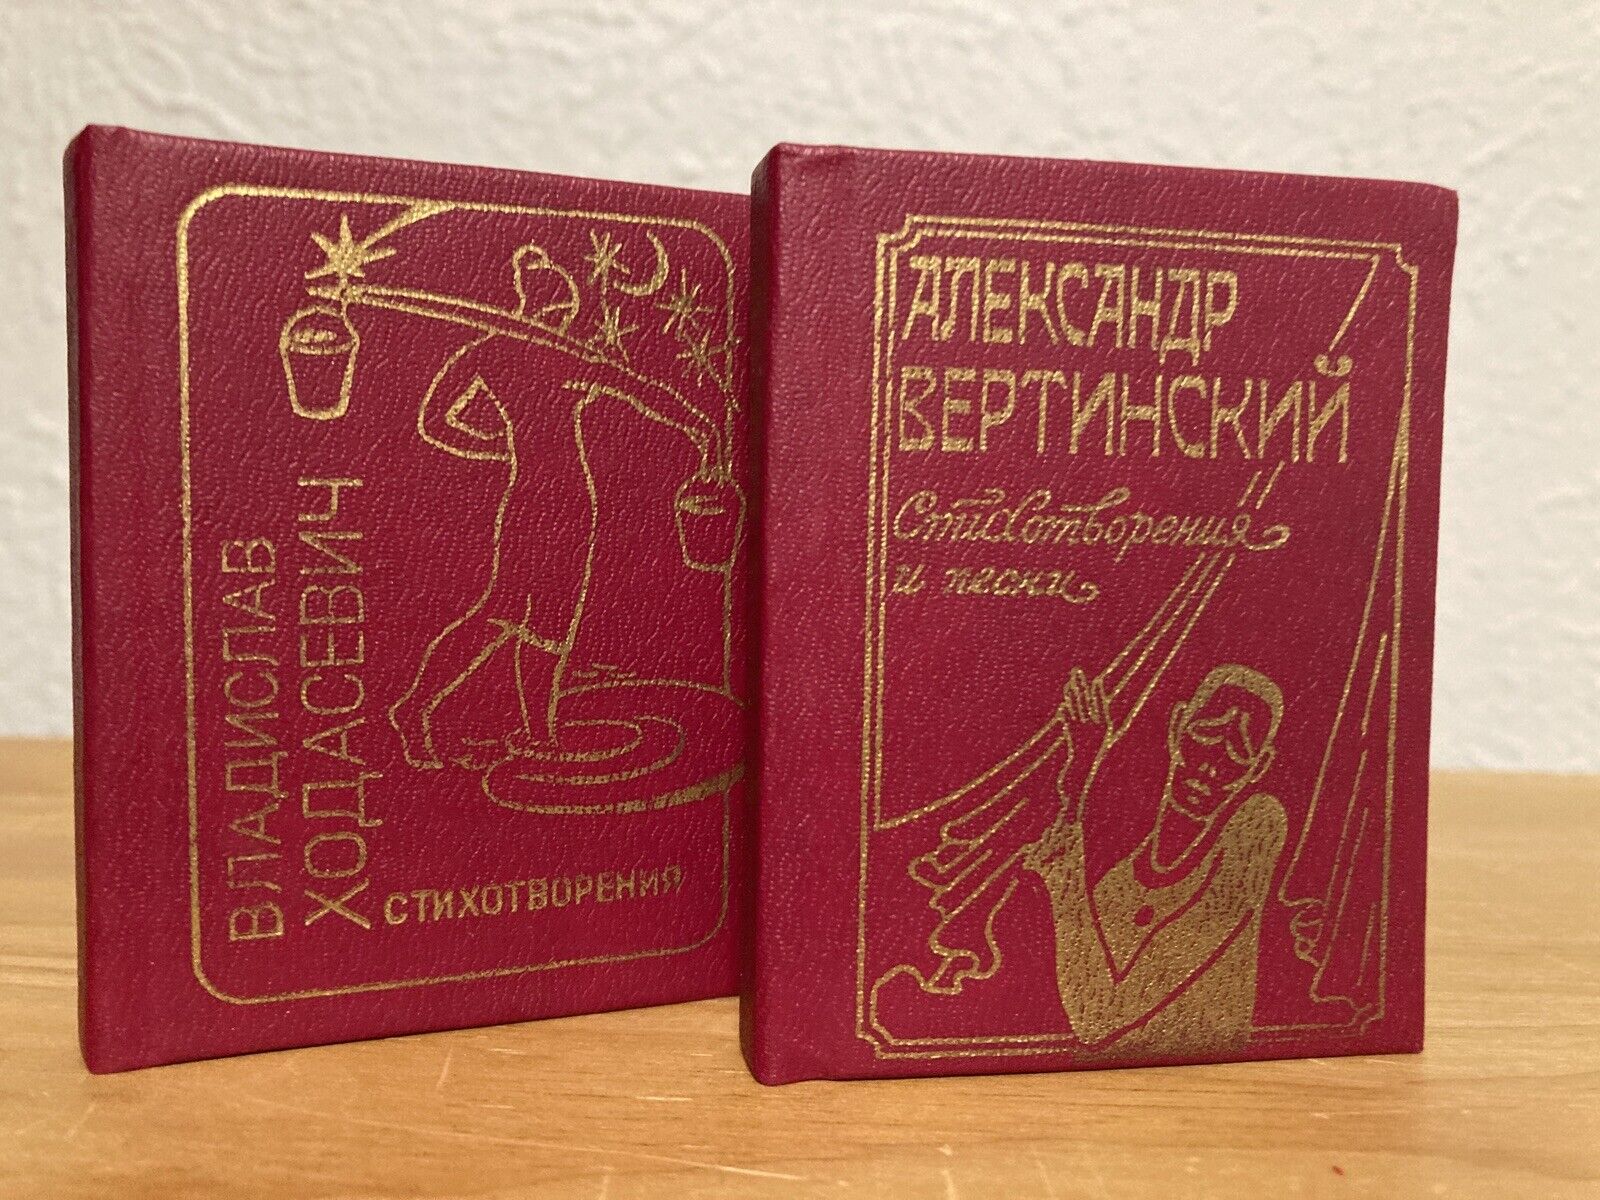 RARE 2 Russian Poetry Miniature Books A.Vertinsky V.Khodasevich Collectible 90th